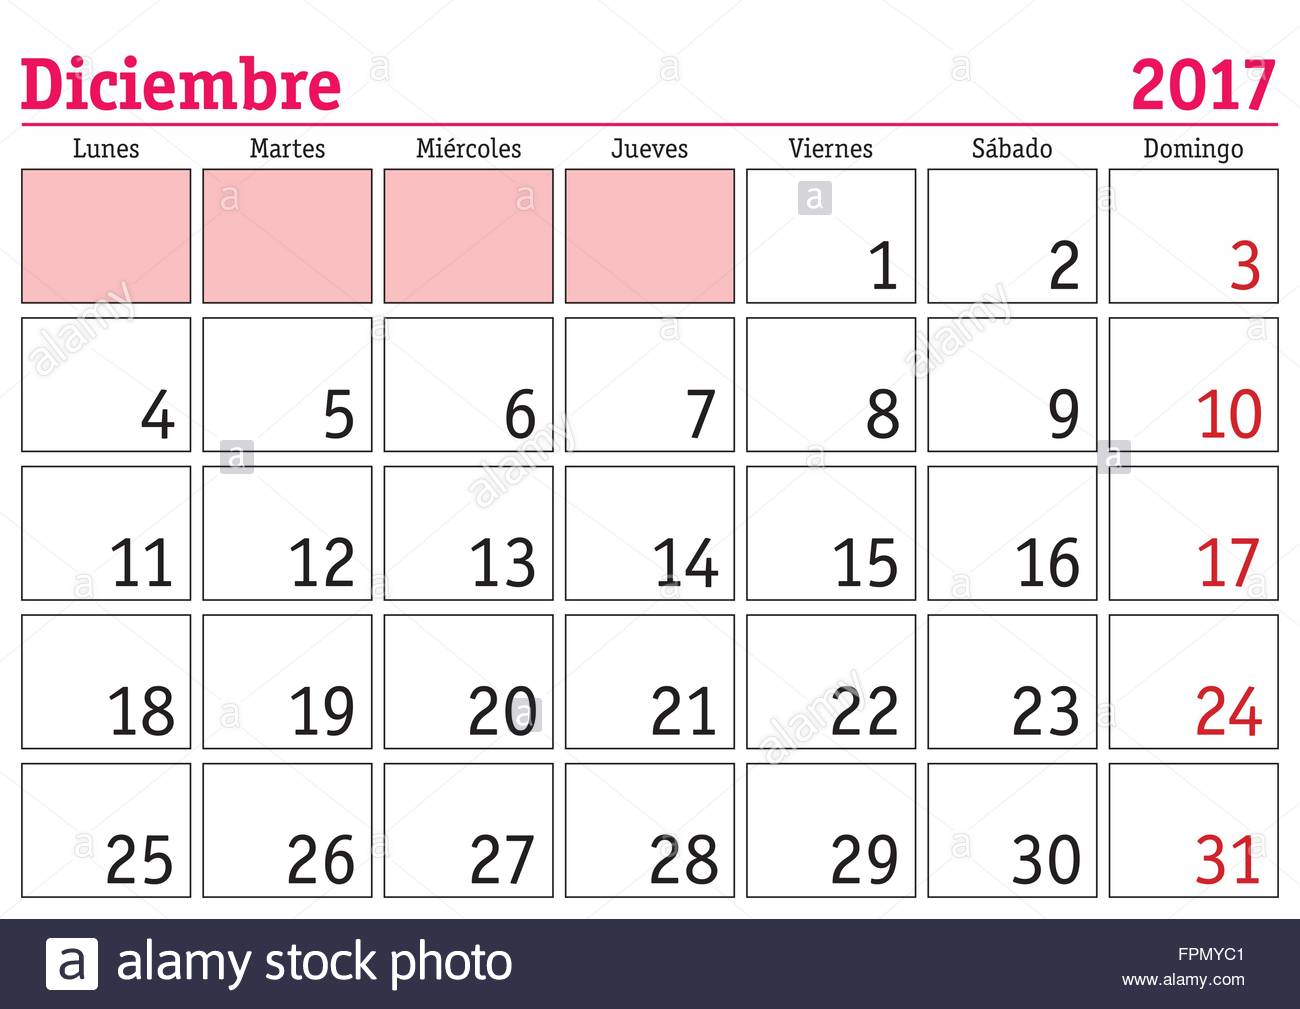 December month in a year 2017 wall calendar in spanish. Diciembre Stock